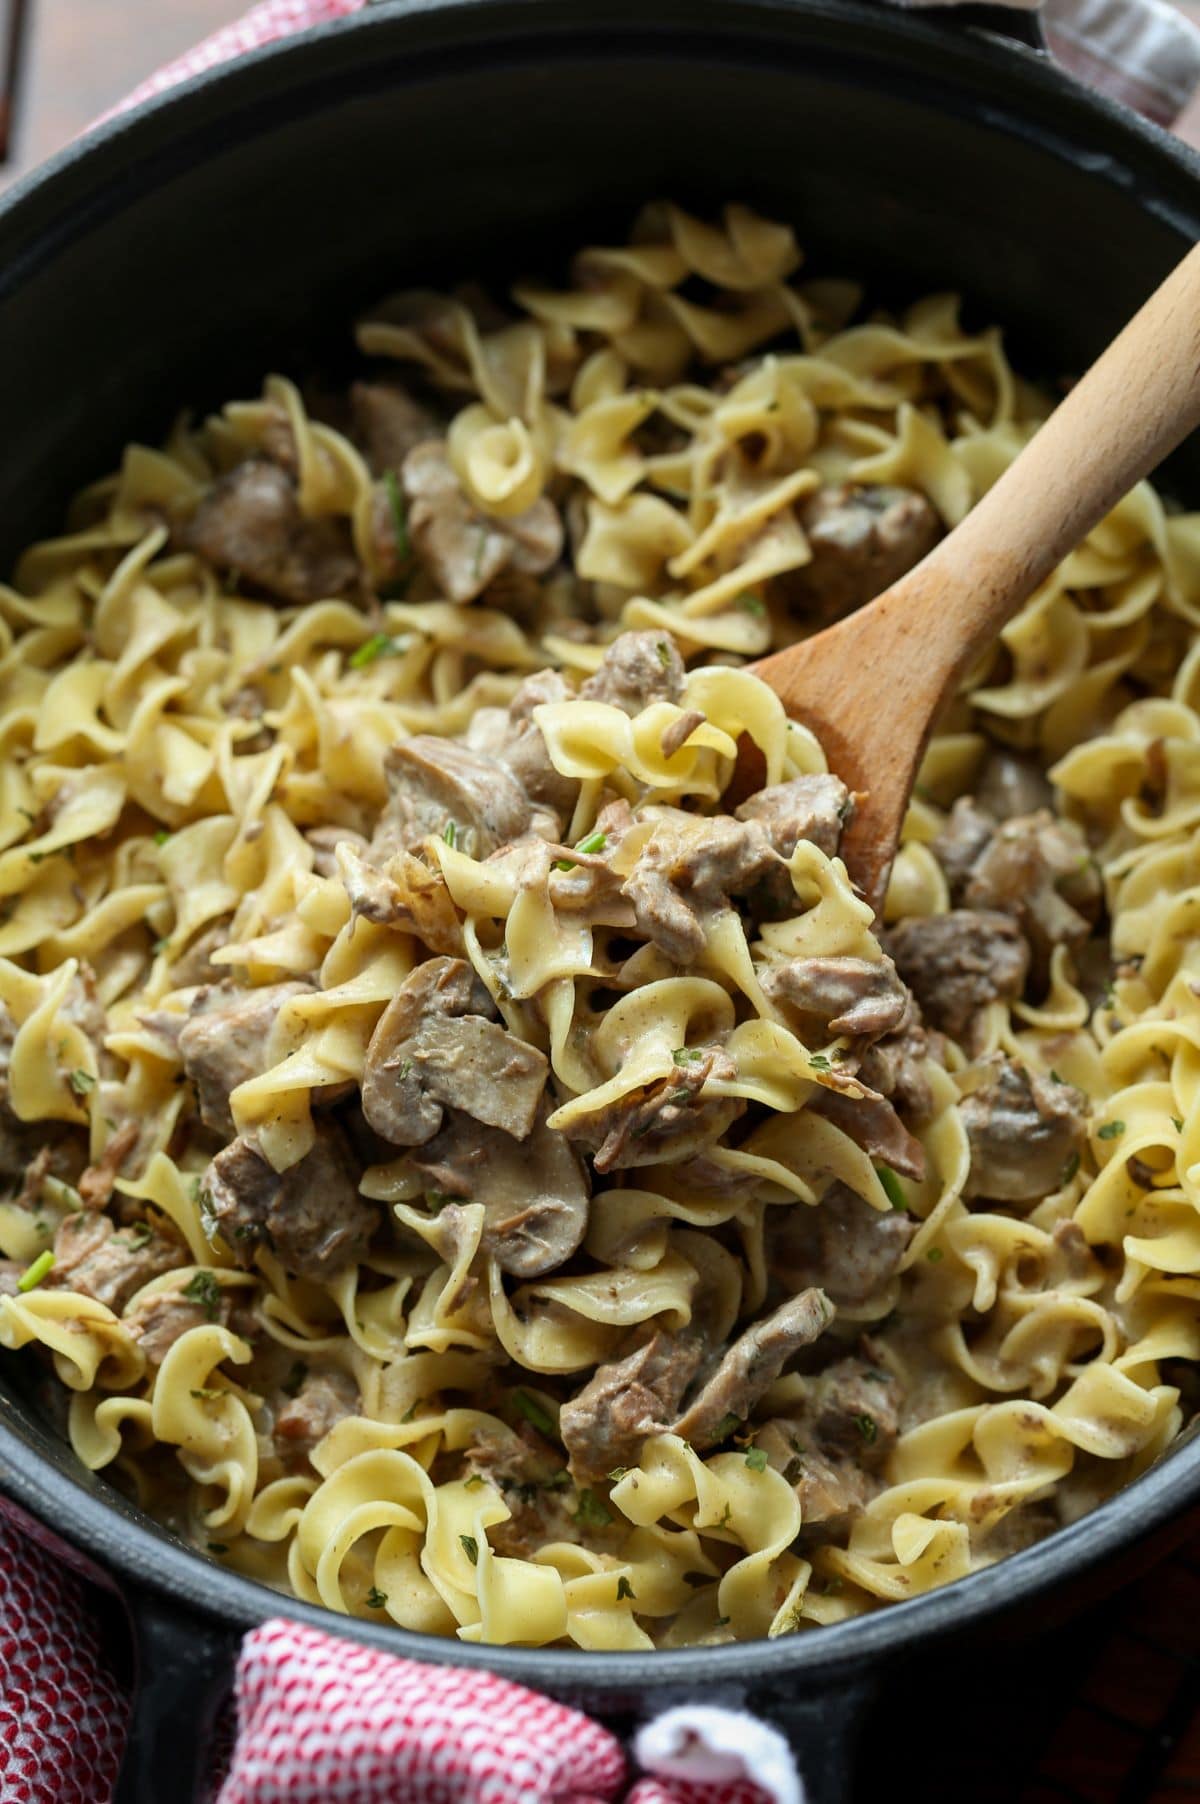 A Crockpot filled with beef stroganoff and egg noodles. A wooden spoon is lifting out a spoonful.